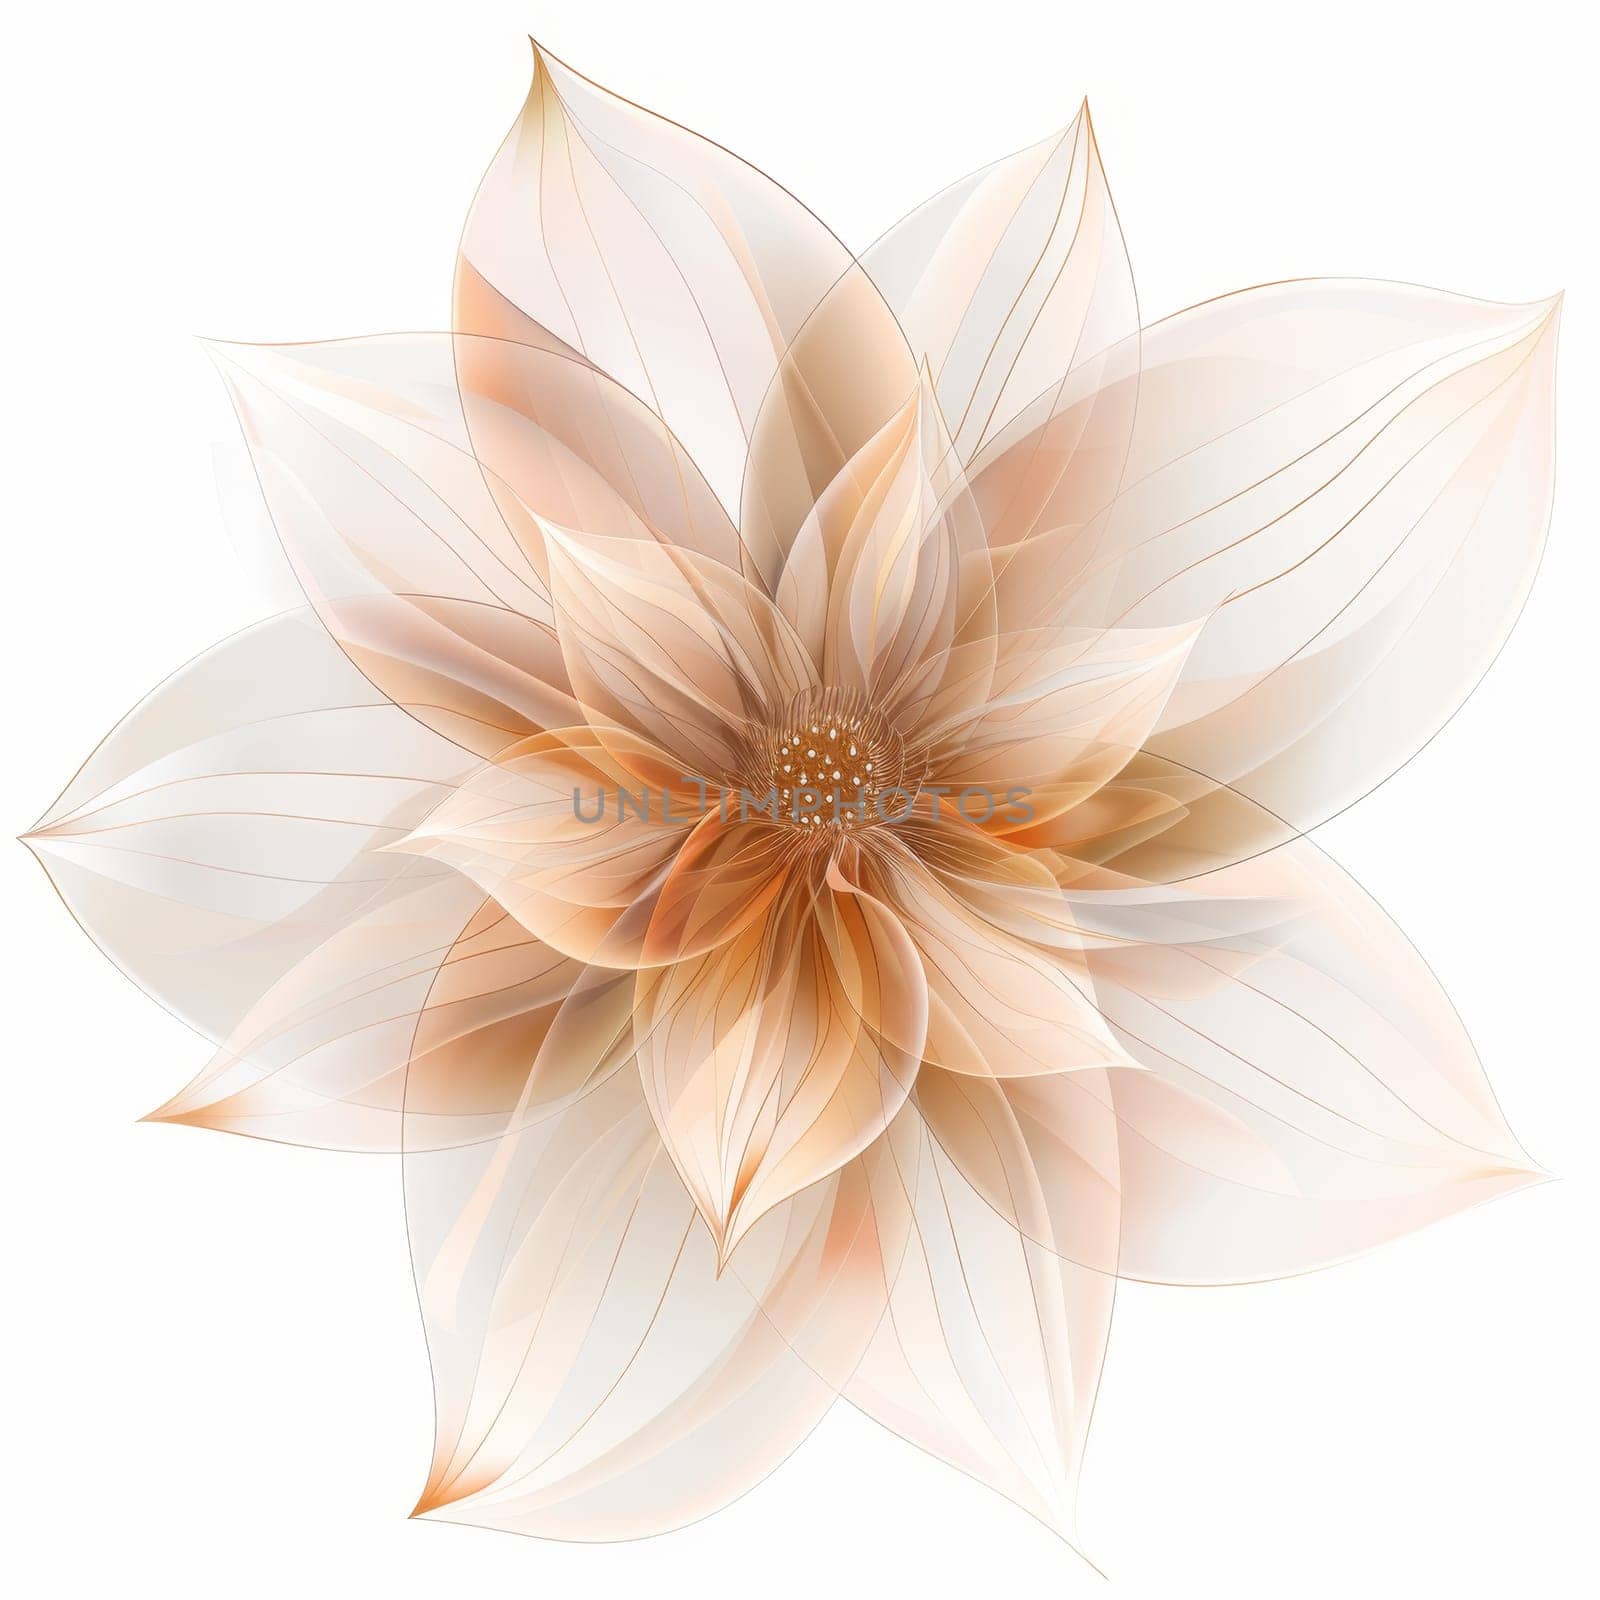 A magical flower bud with petals on a white background. Illustration by Lobachad